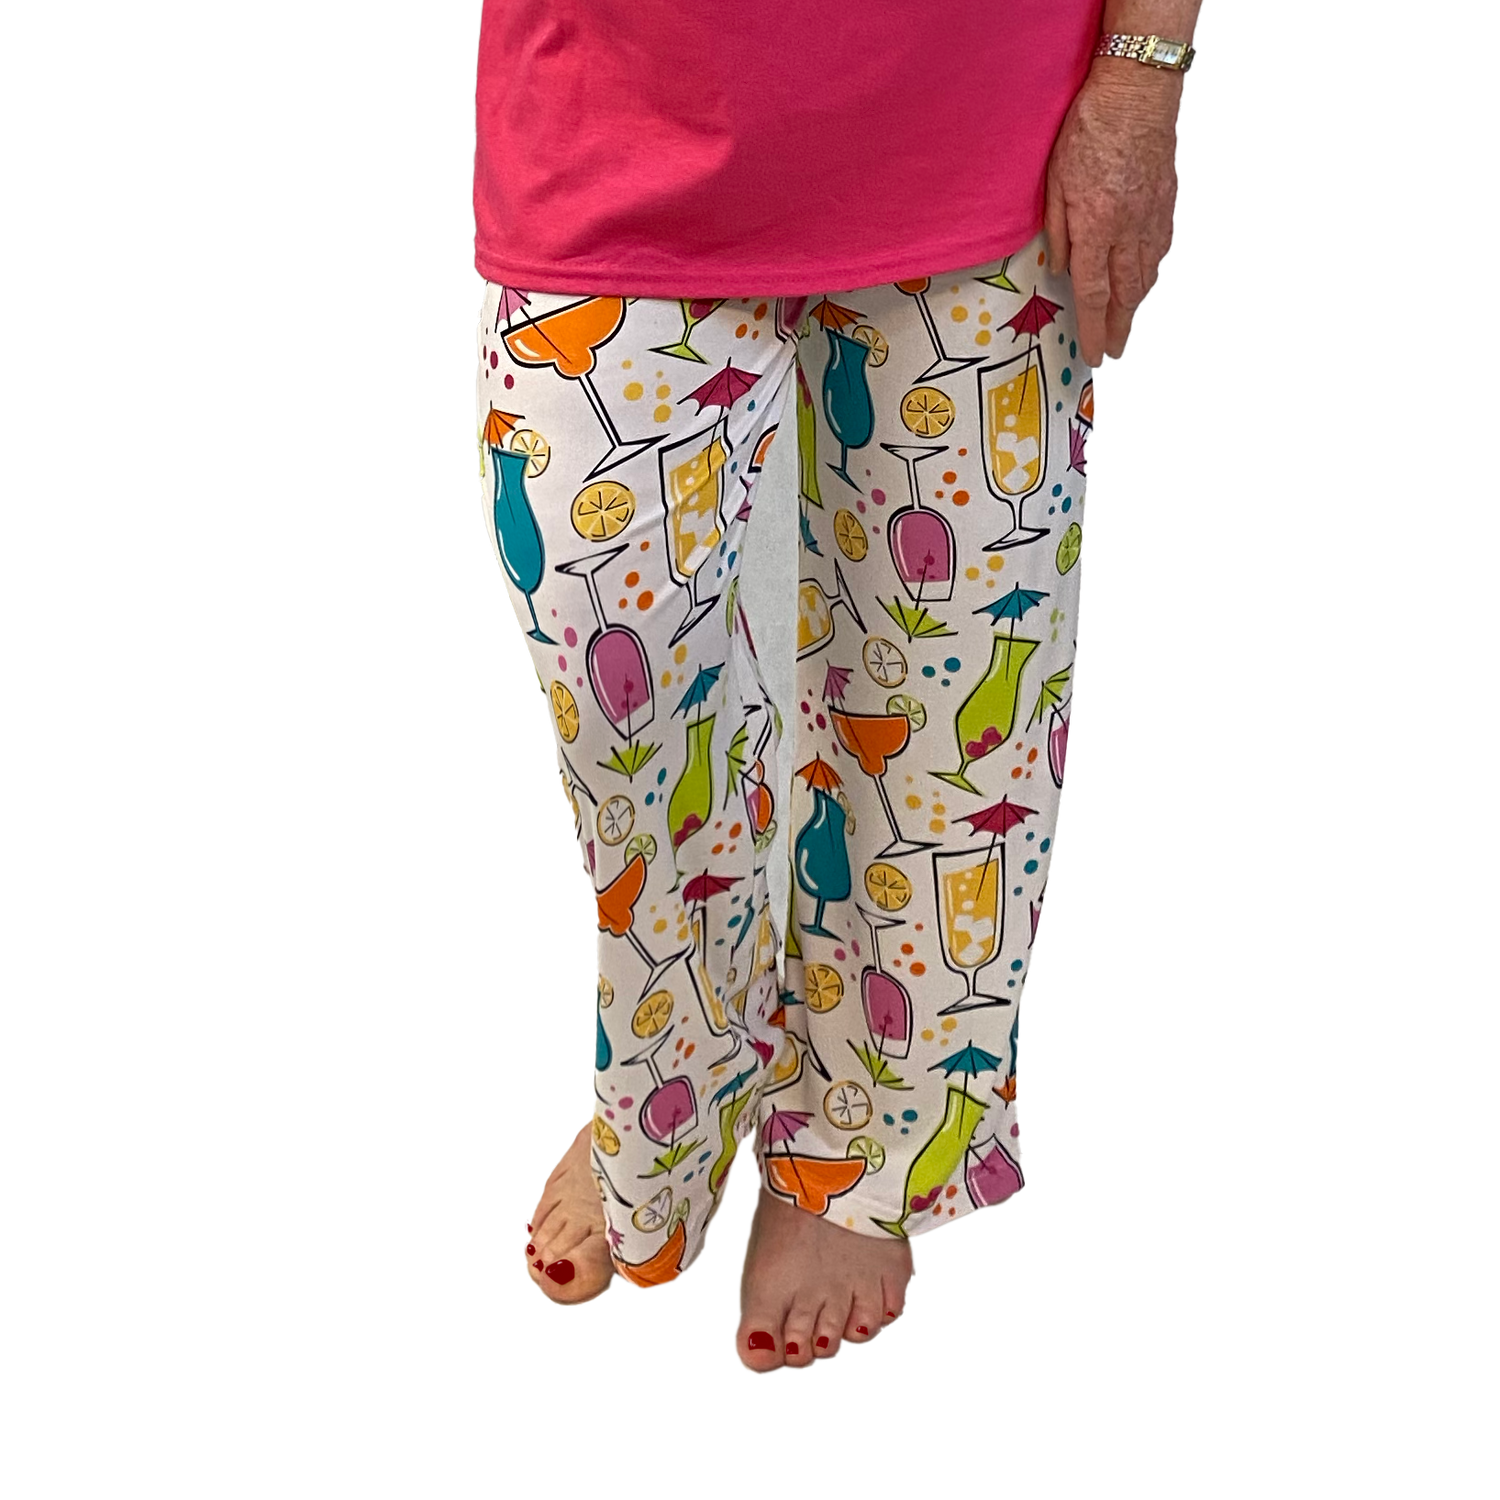 Blossom Girls Pajama Pants by Lory Lux